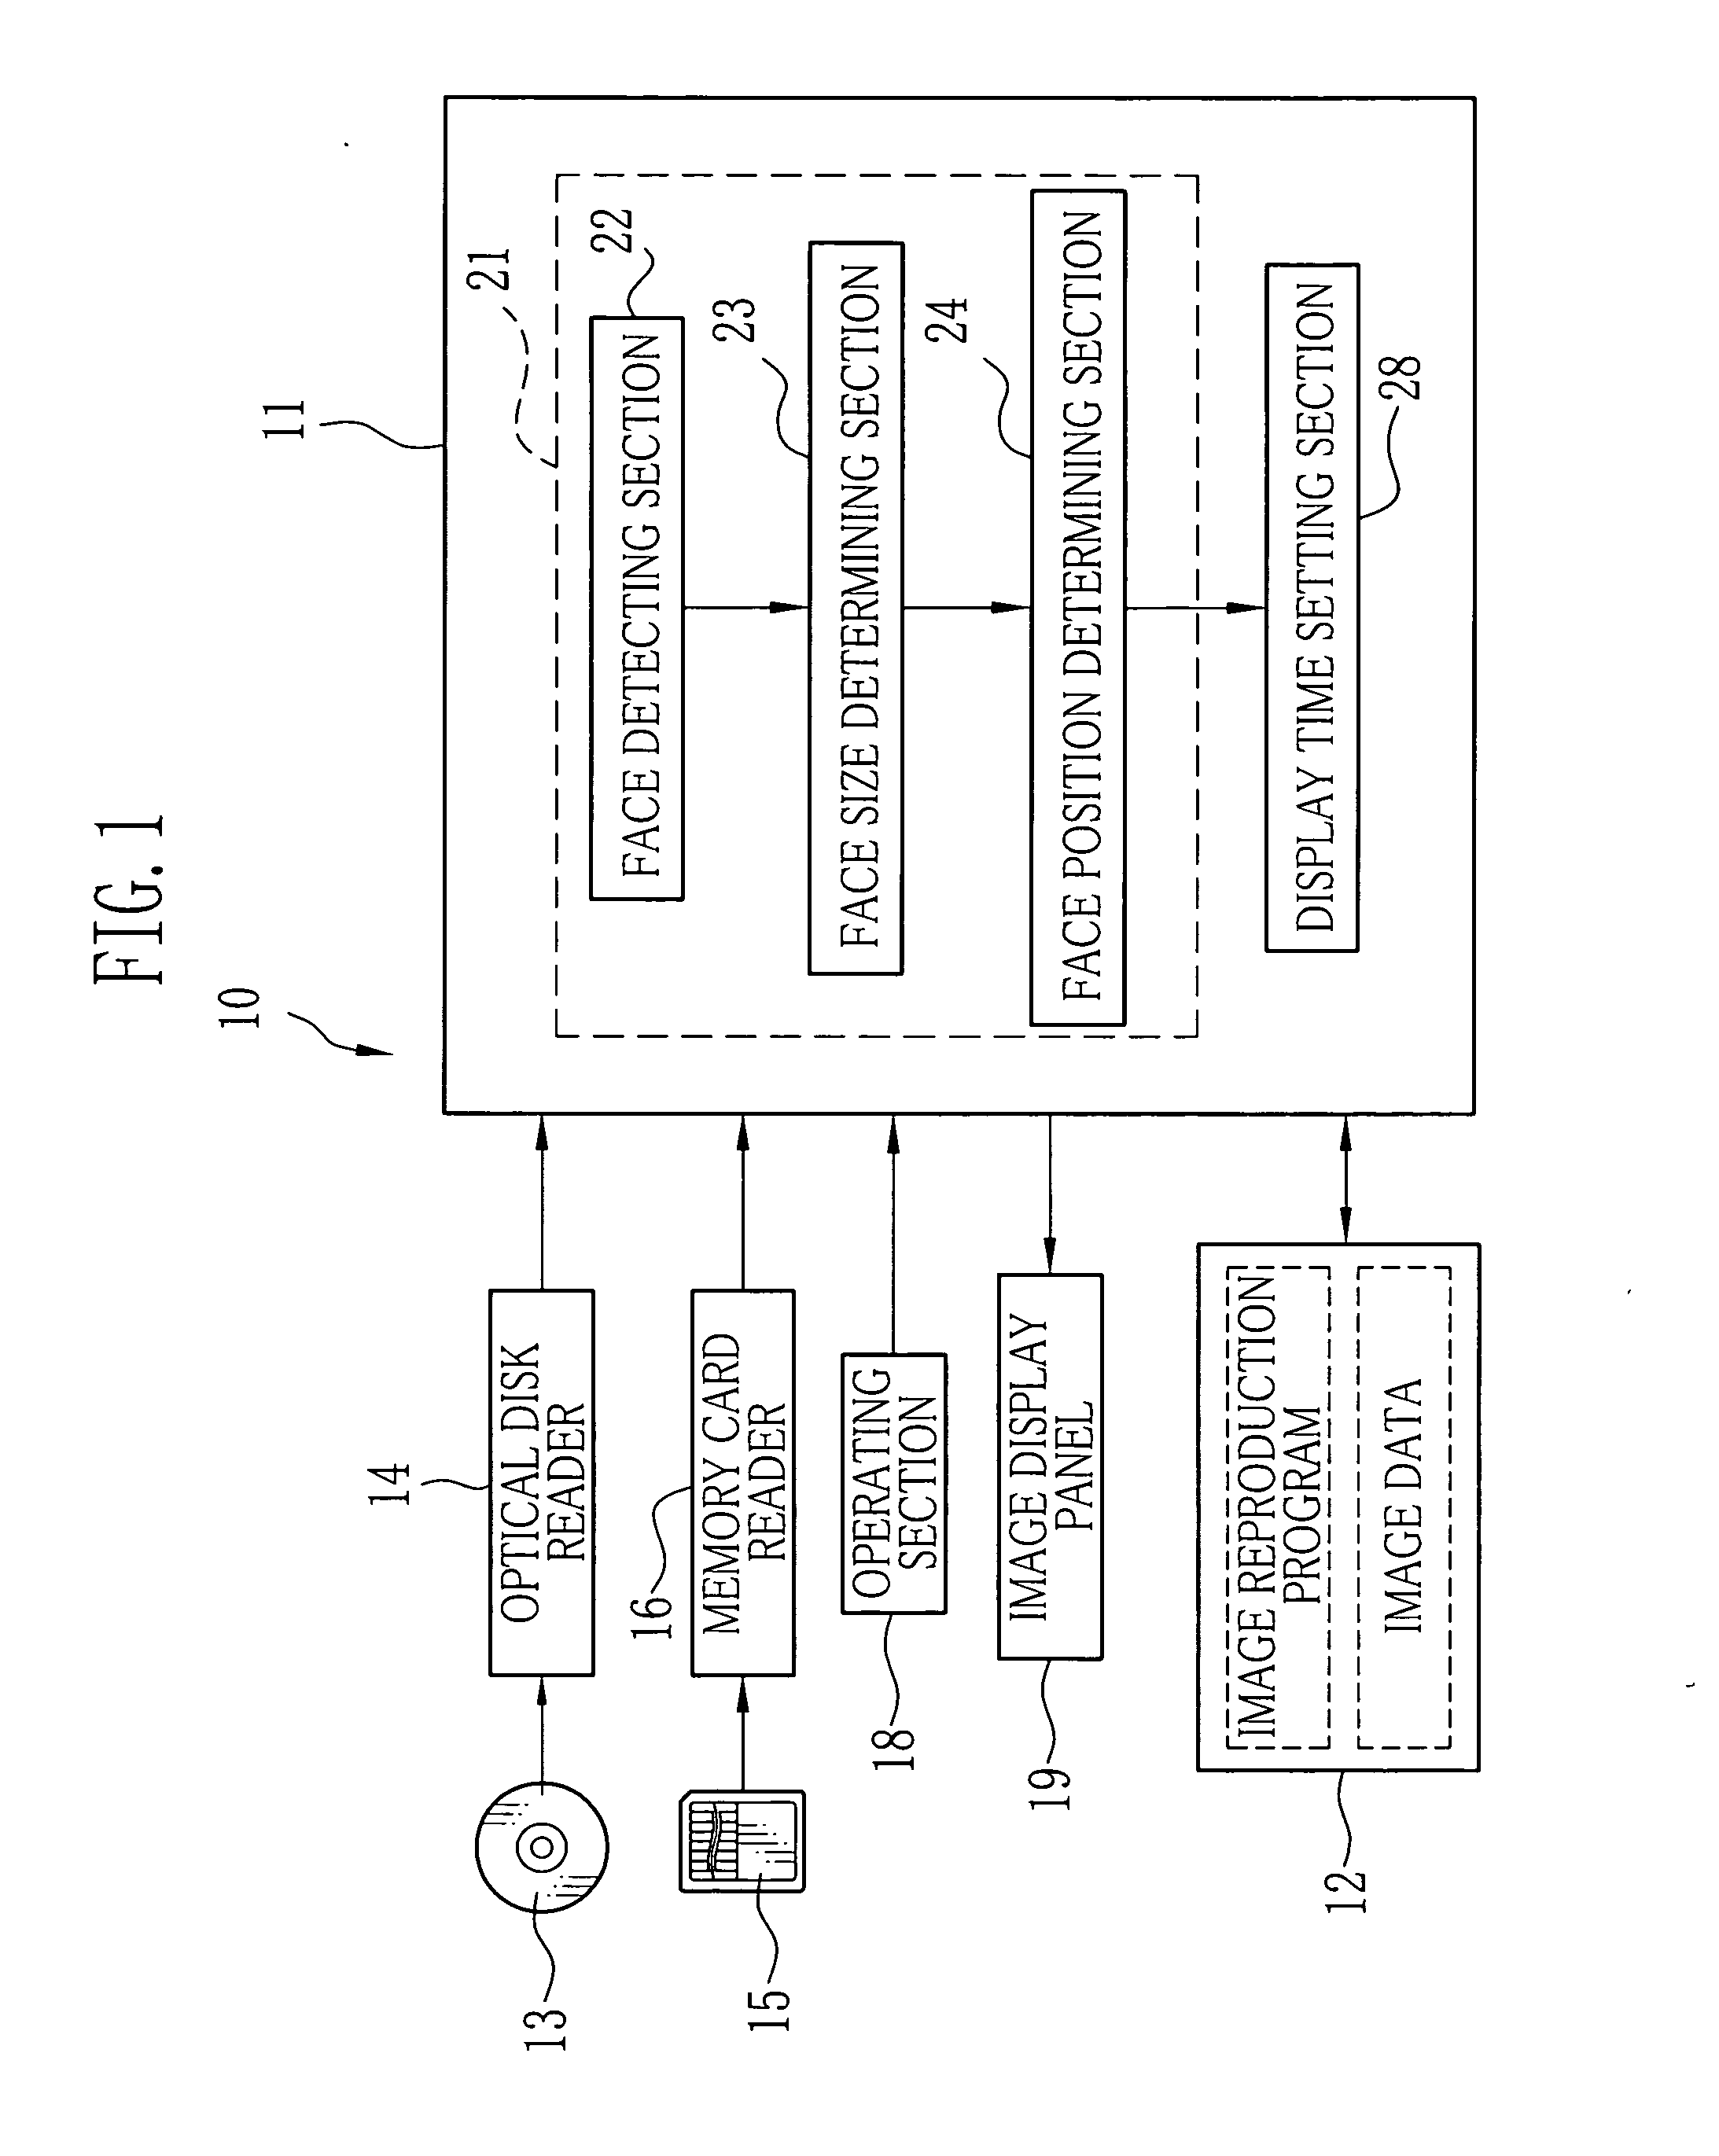 Image reproduction apparatus and program, and photo movie producing apparatus and program